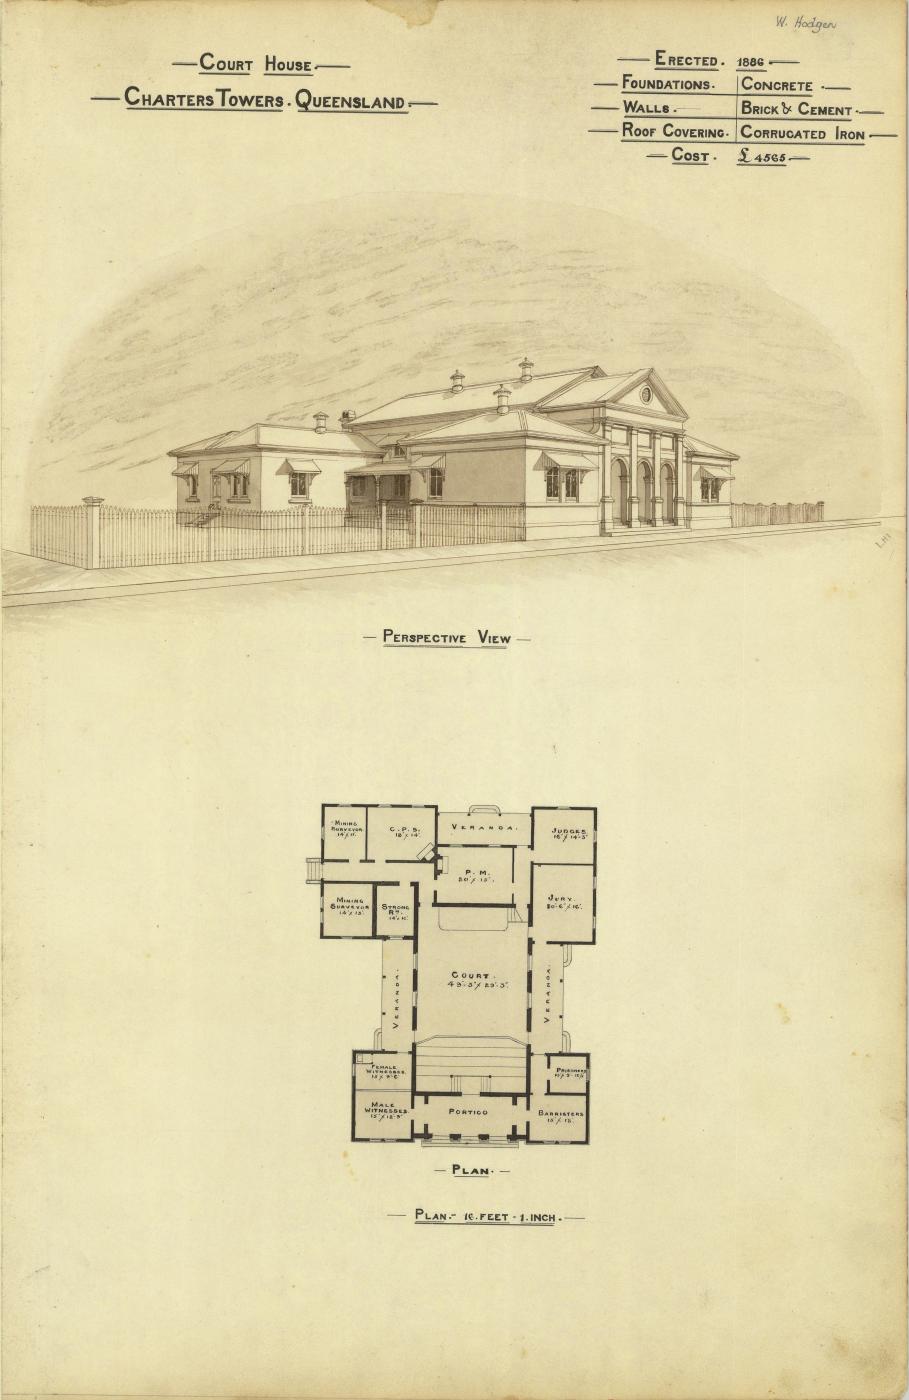 Architectural plan of the Court House, Charters Towers